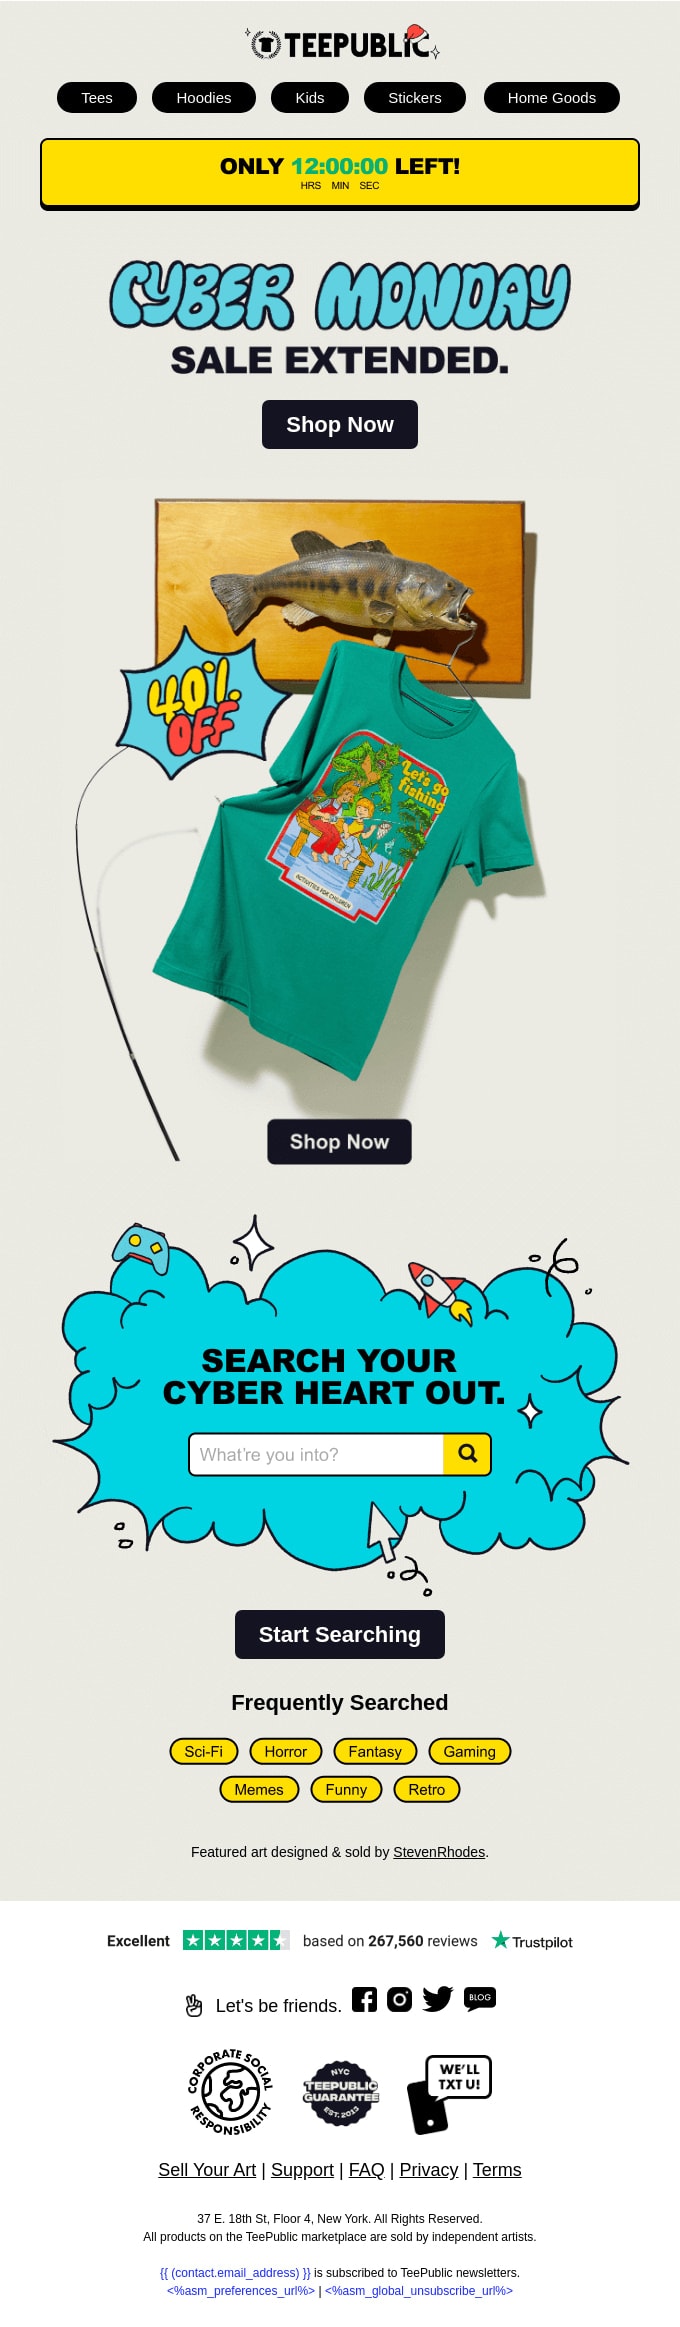 Email by Teepublic